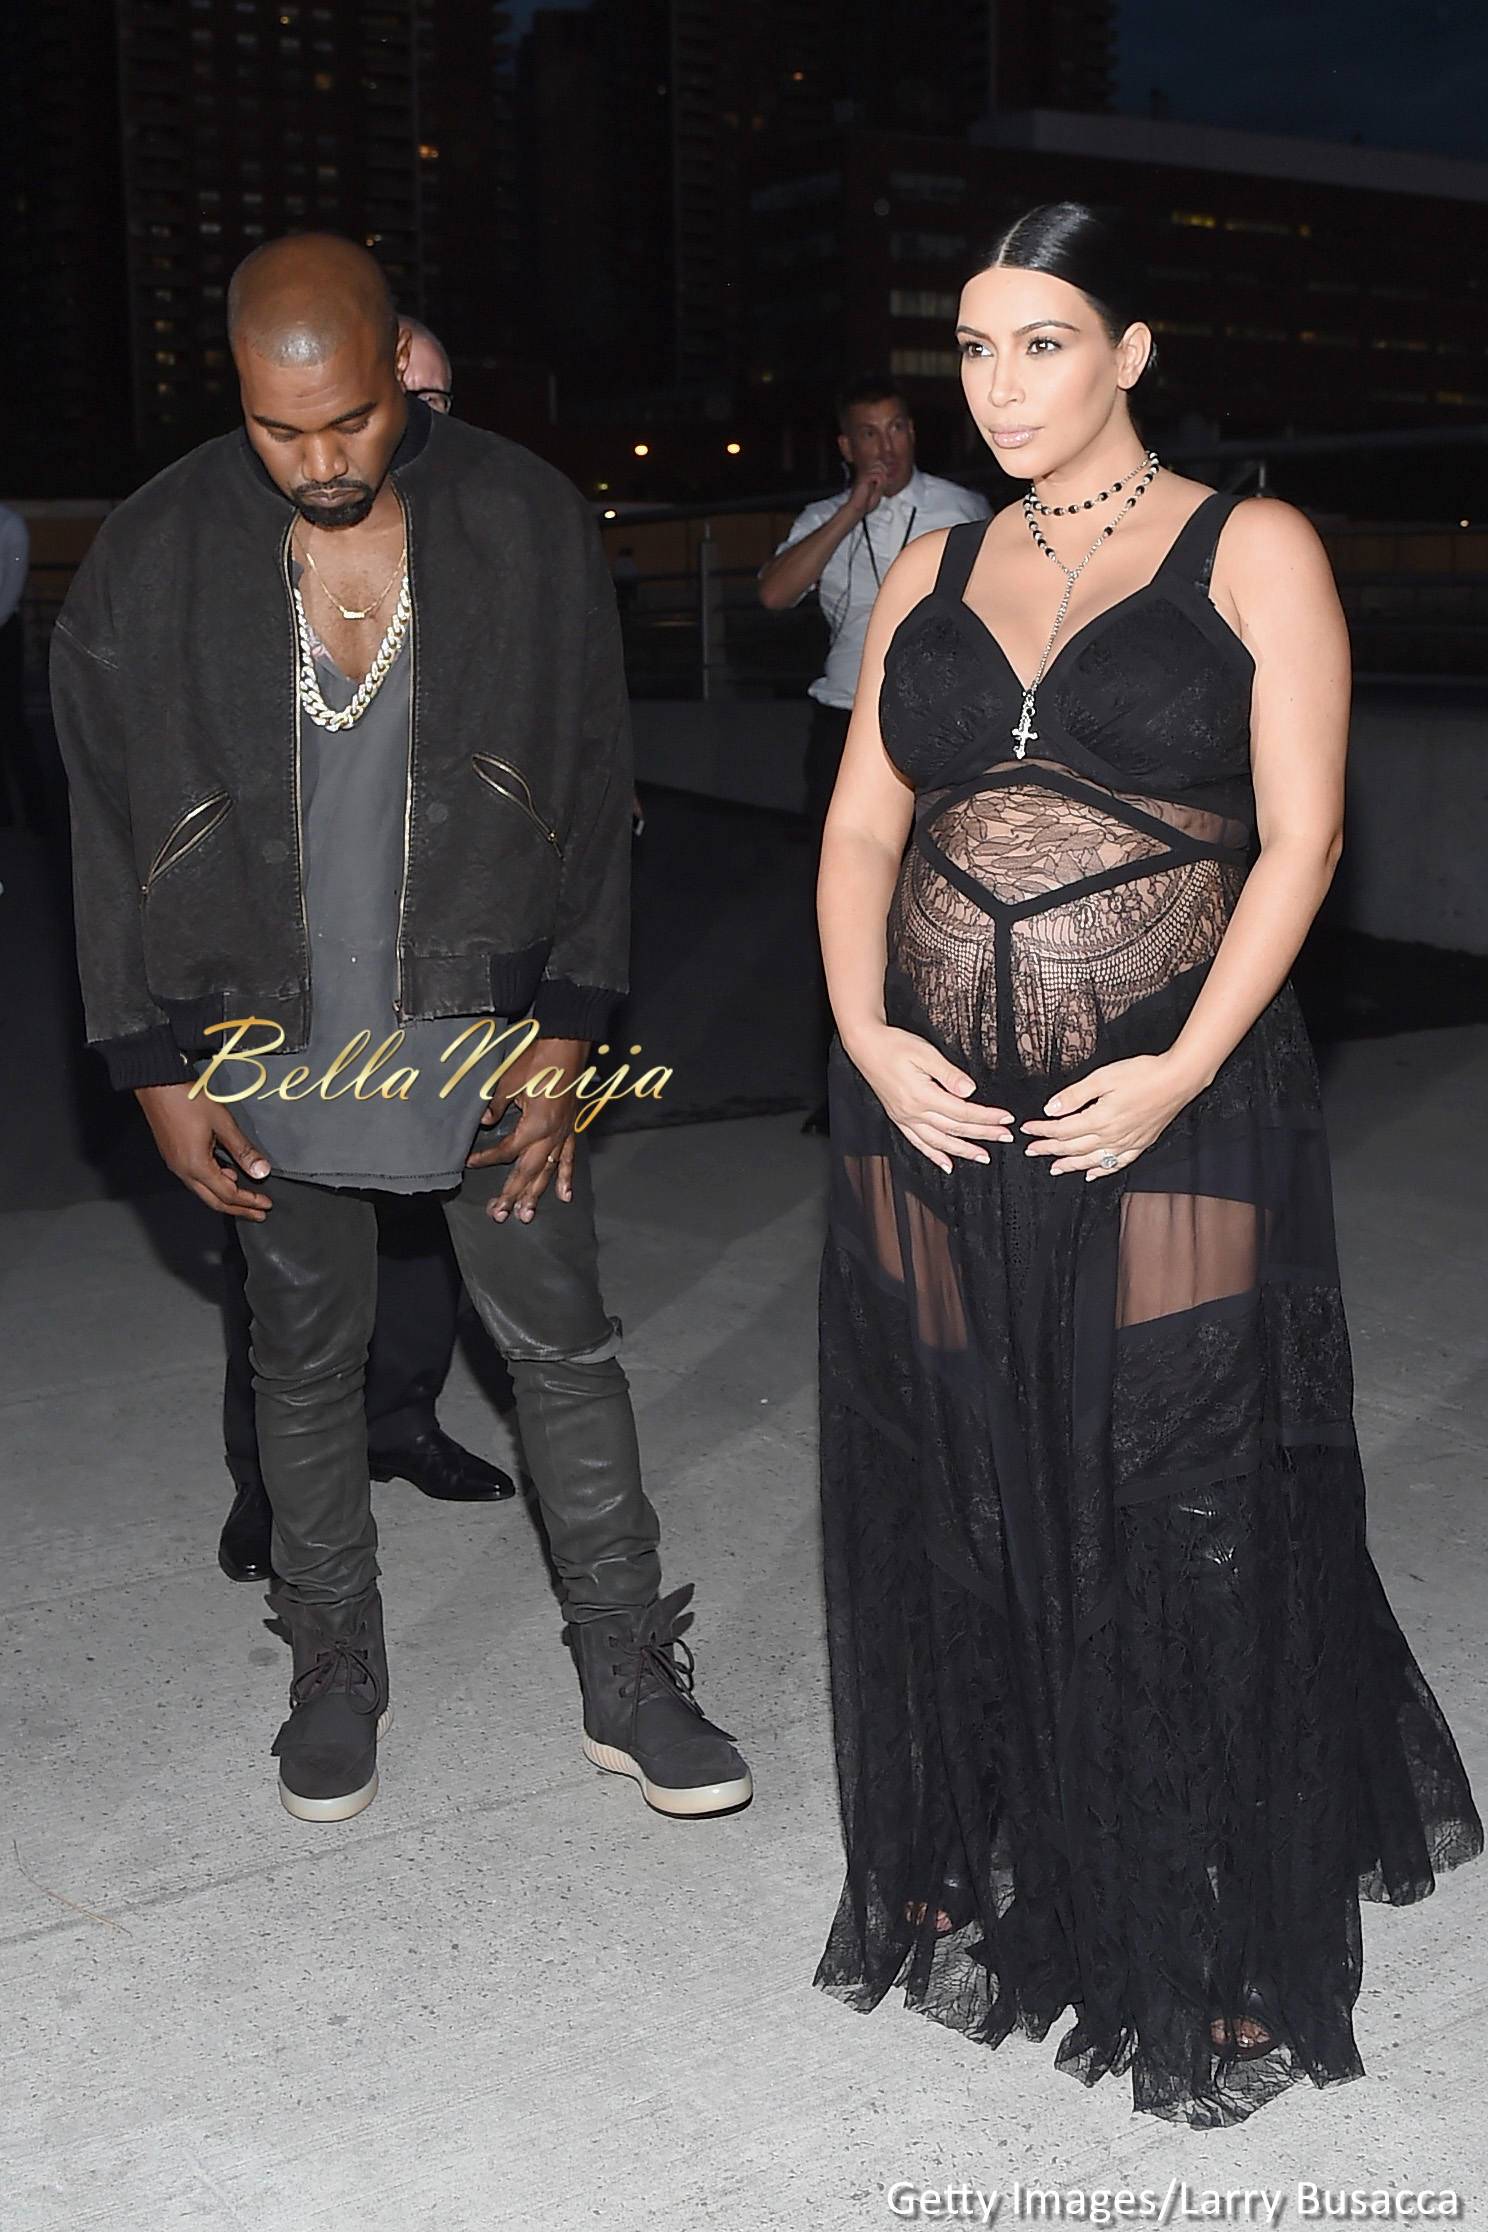 Her Most Daring Pregnancy Look? Check Out Kim Kardashian's Outfit to the Givenchy Show ...1488 x 2232